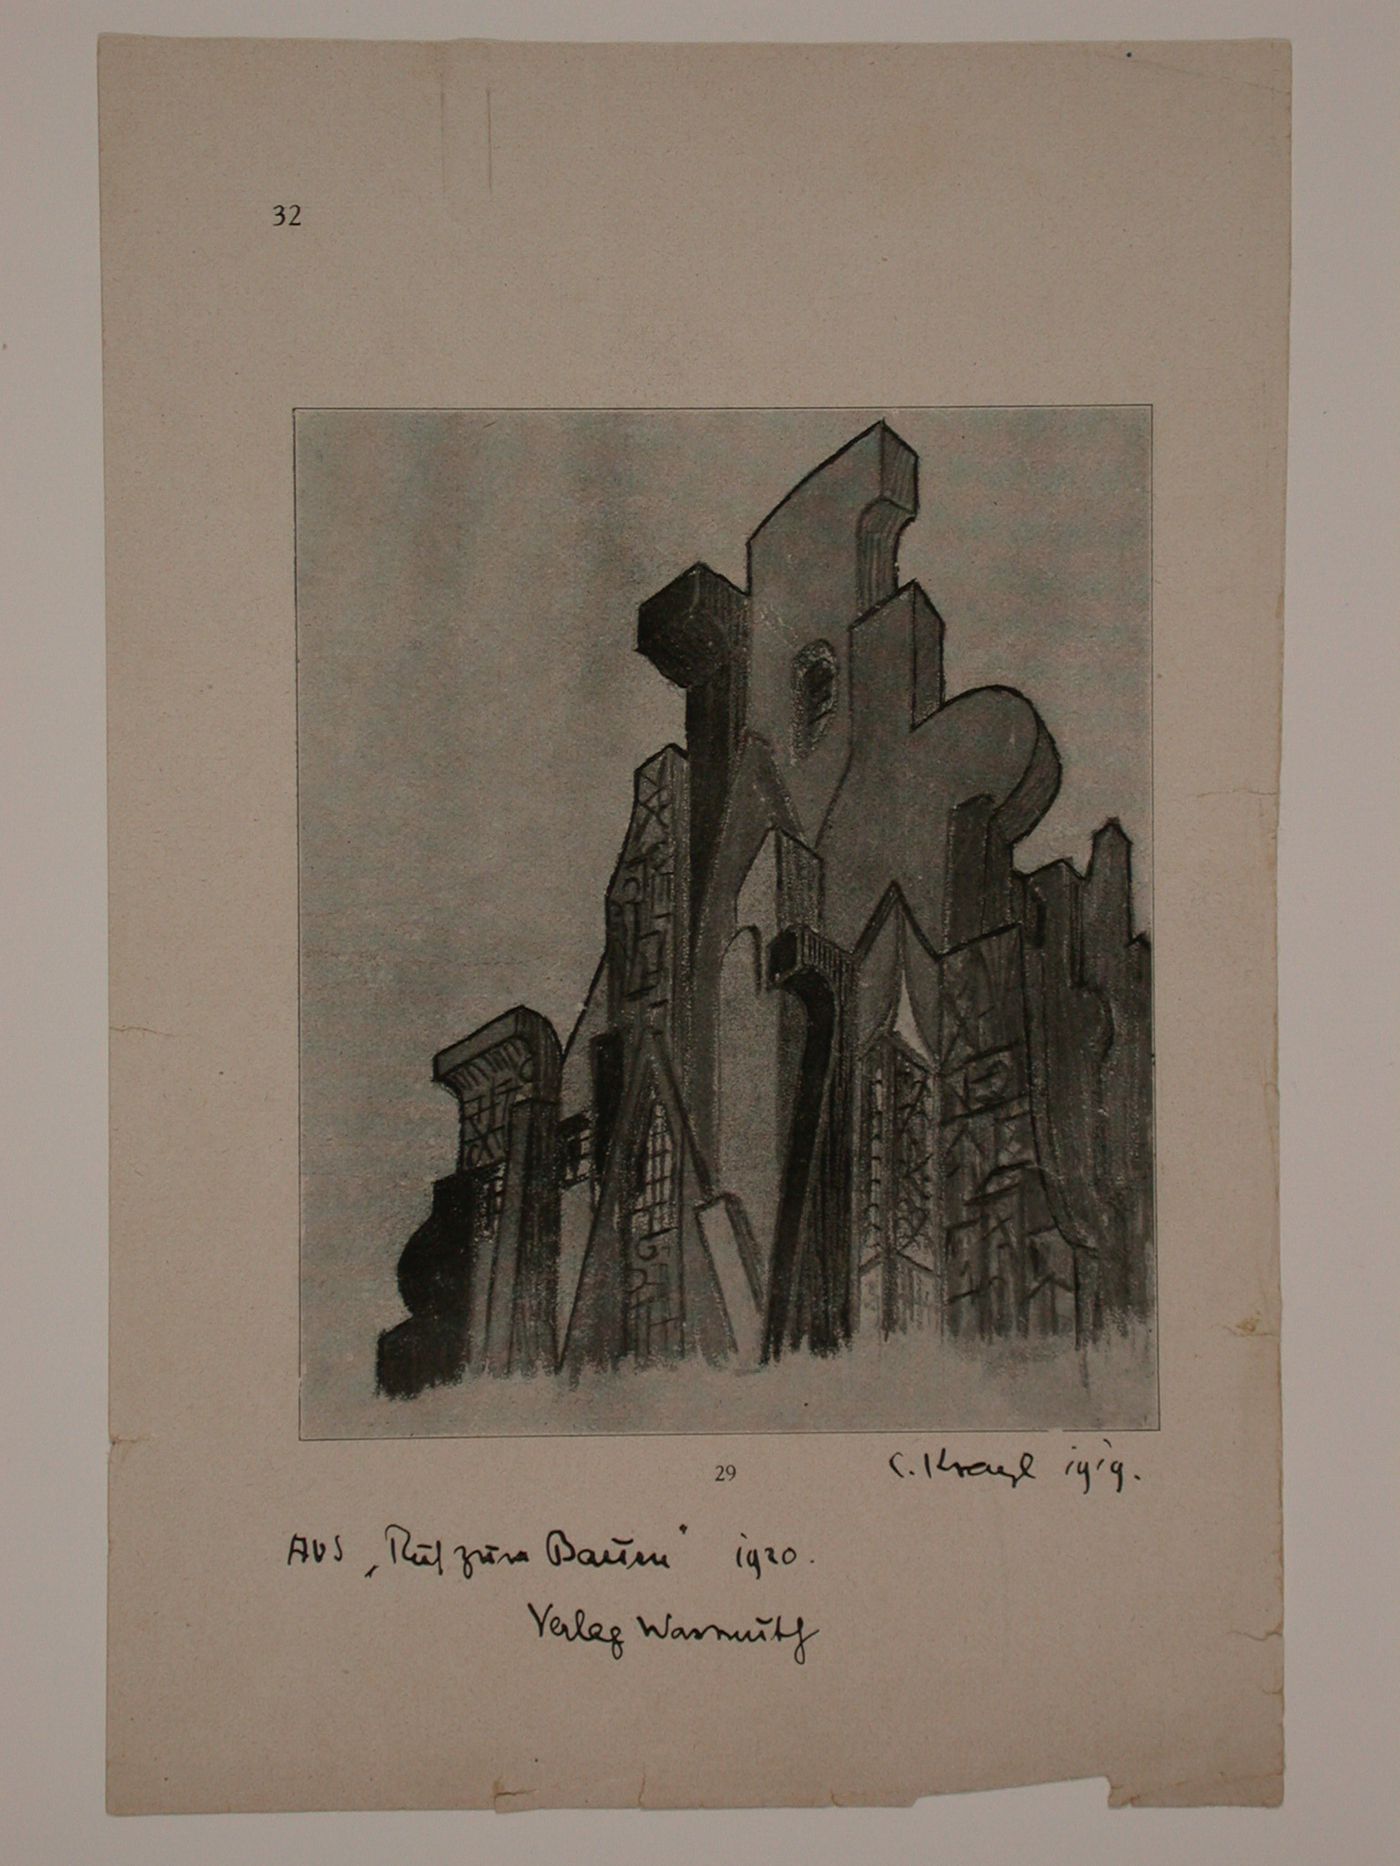 Drawing of an unidentified structure by Carl Krayl